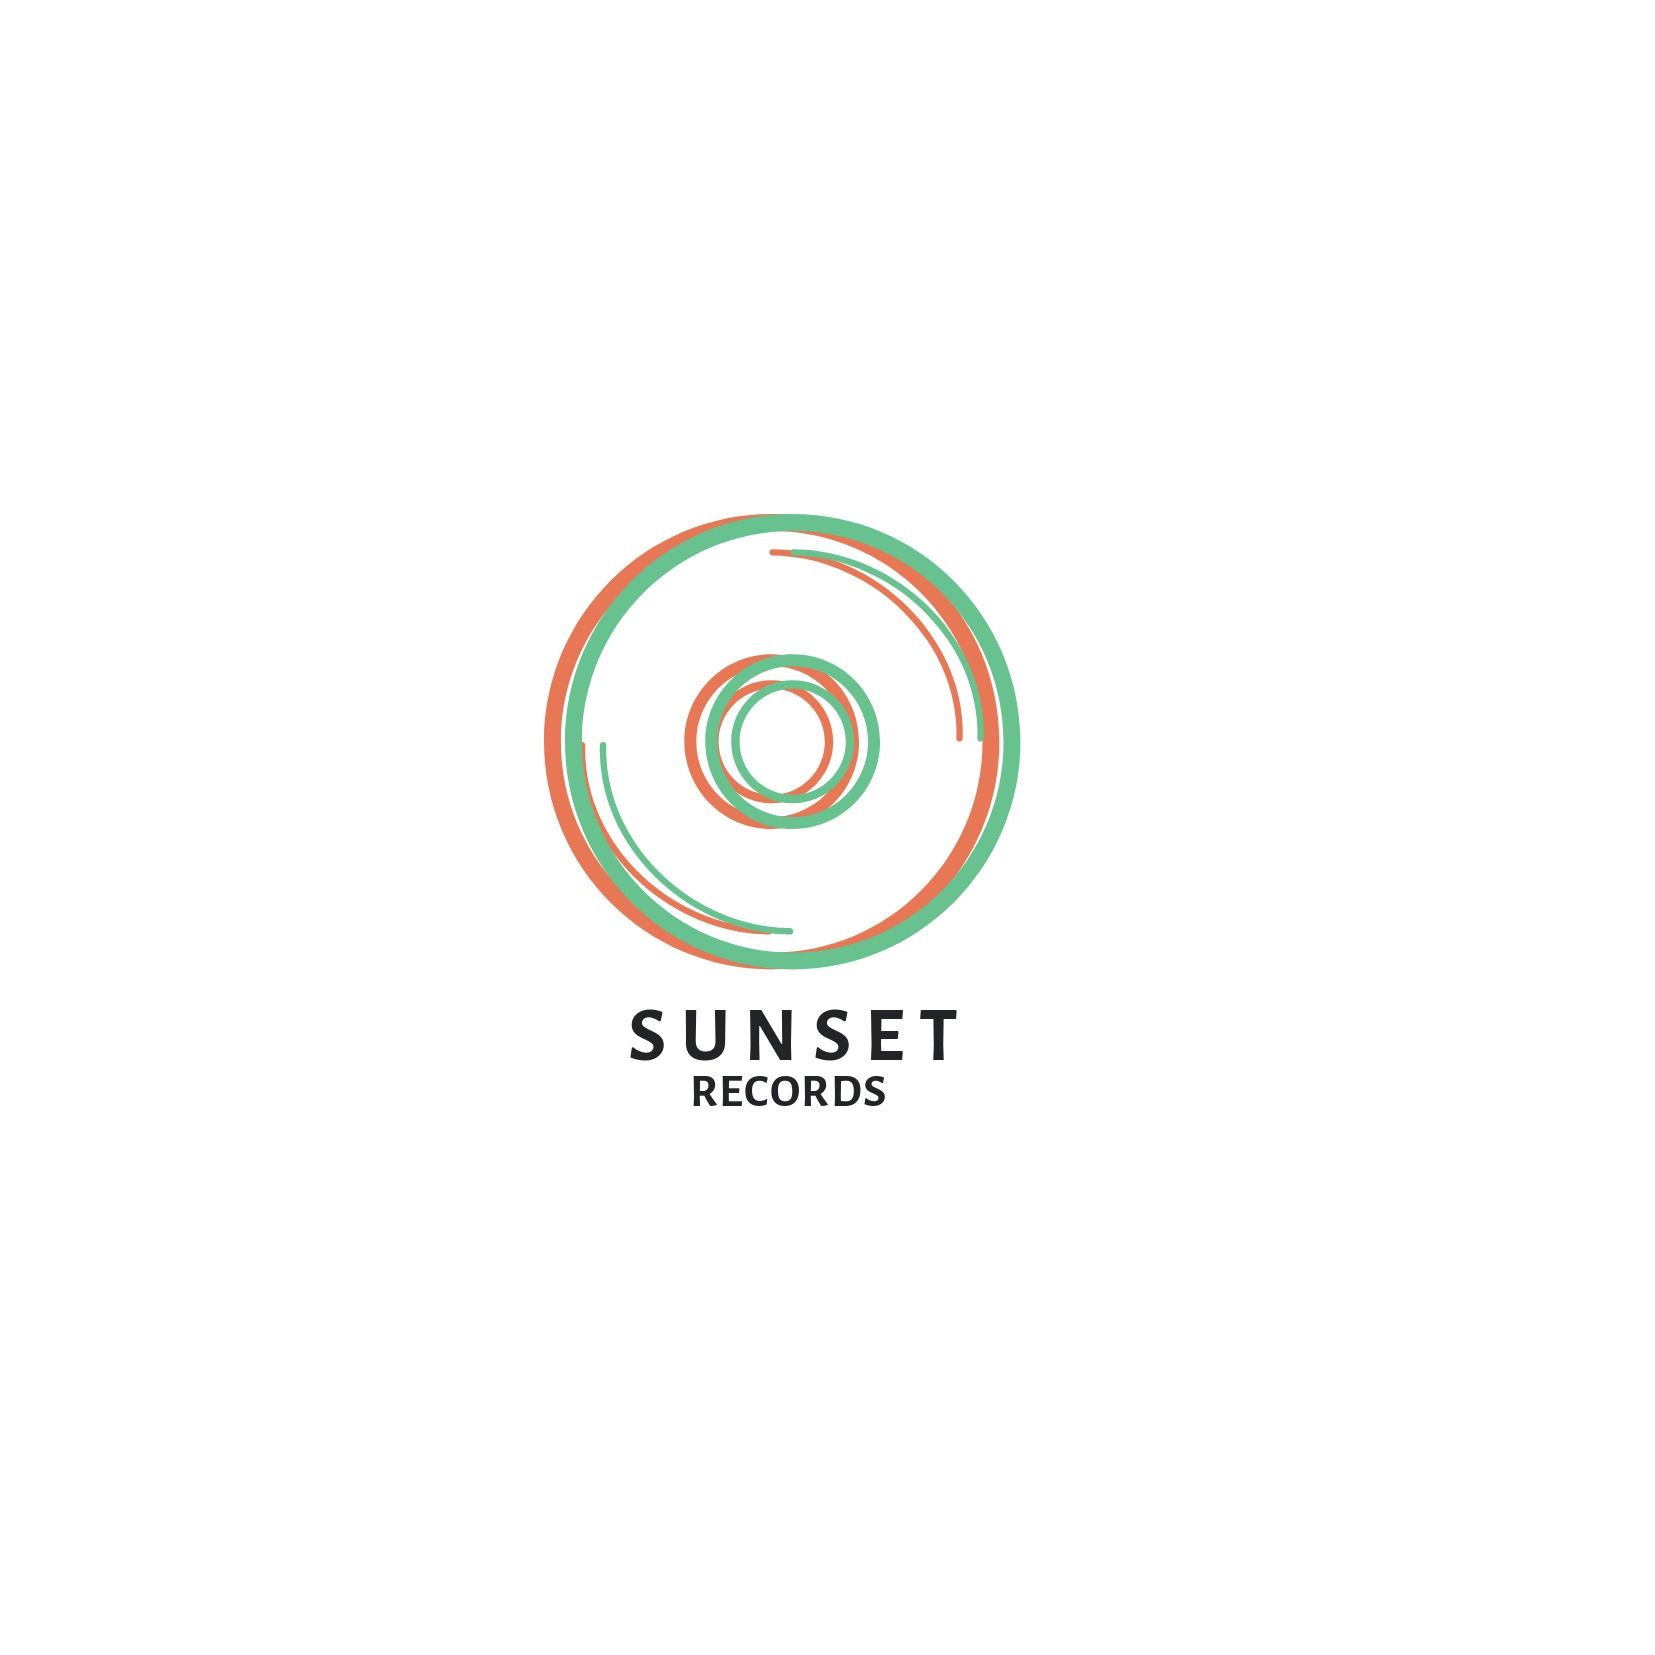 Music logo design with 'Sunset Records' as a title - Alegreya Sans SC is a professional font suitable for minimalistic, colorful illustrations - Image